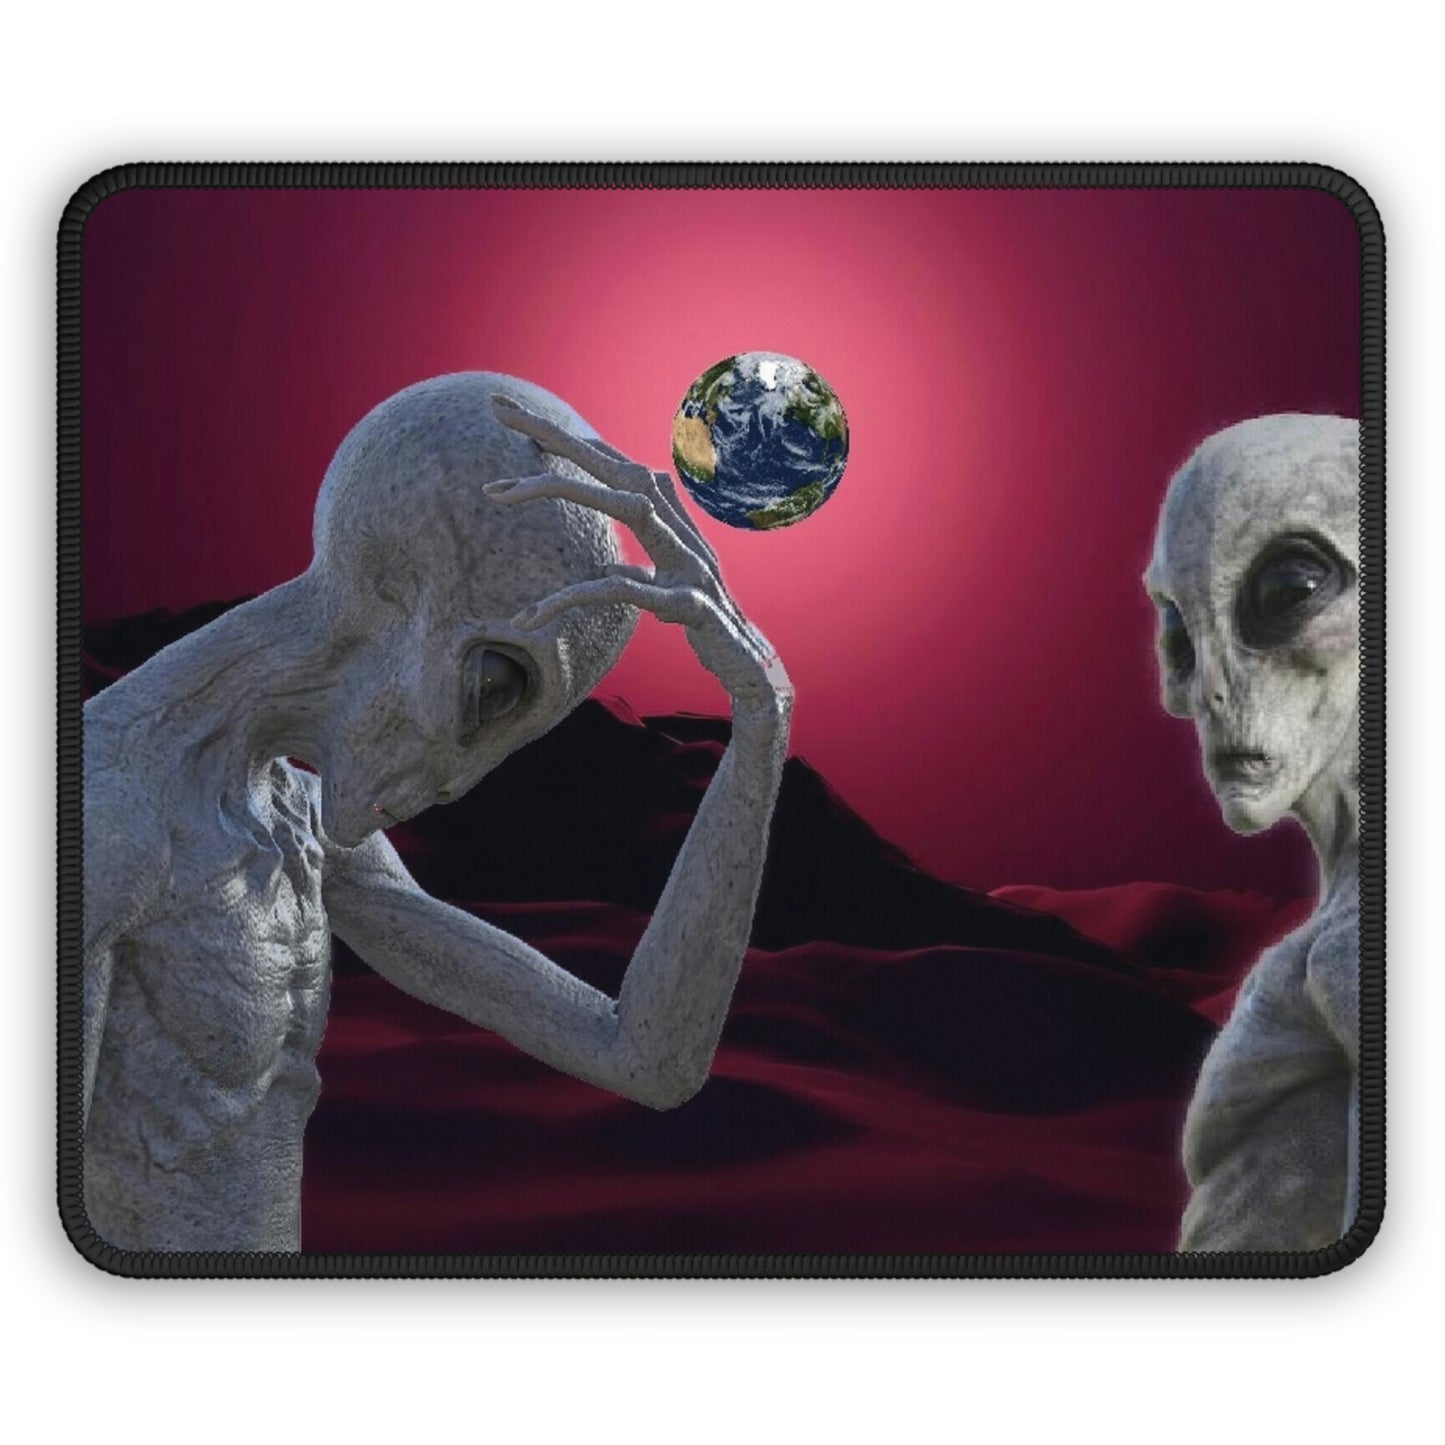 Puzzled Alien Gaming Mouse Pad